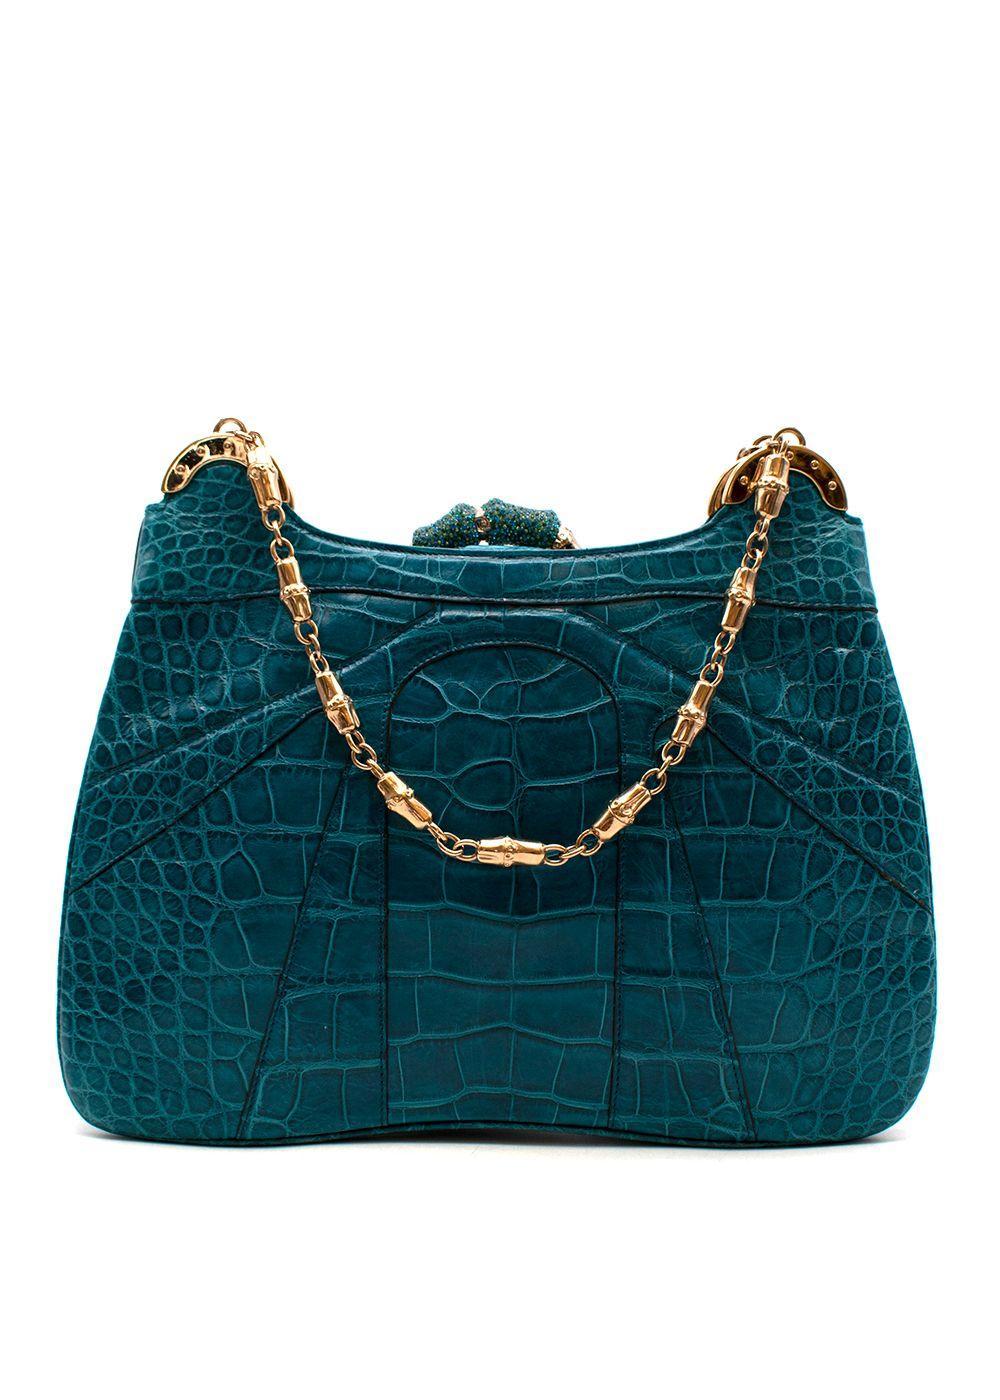 2004 Vintage Iconic Tom Ford for Gucci teal crocodile bag
Teal crocodile, with crystal and gold-tone metal accents
Green silk interior with one open top pocket and a logo branded patch
Materials: Crocodile, Silk
Made in Italy
Excellent condition

